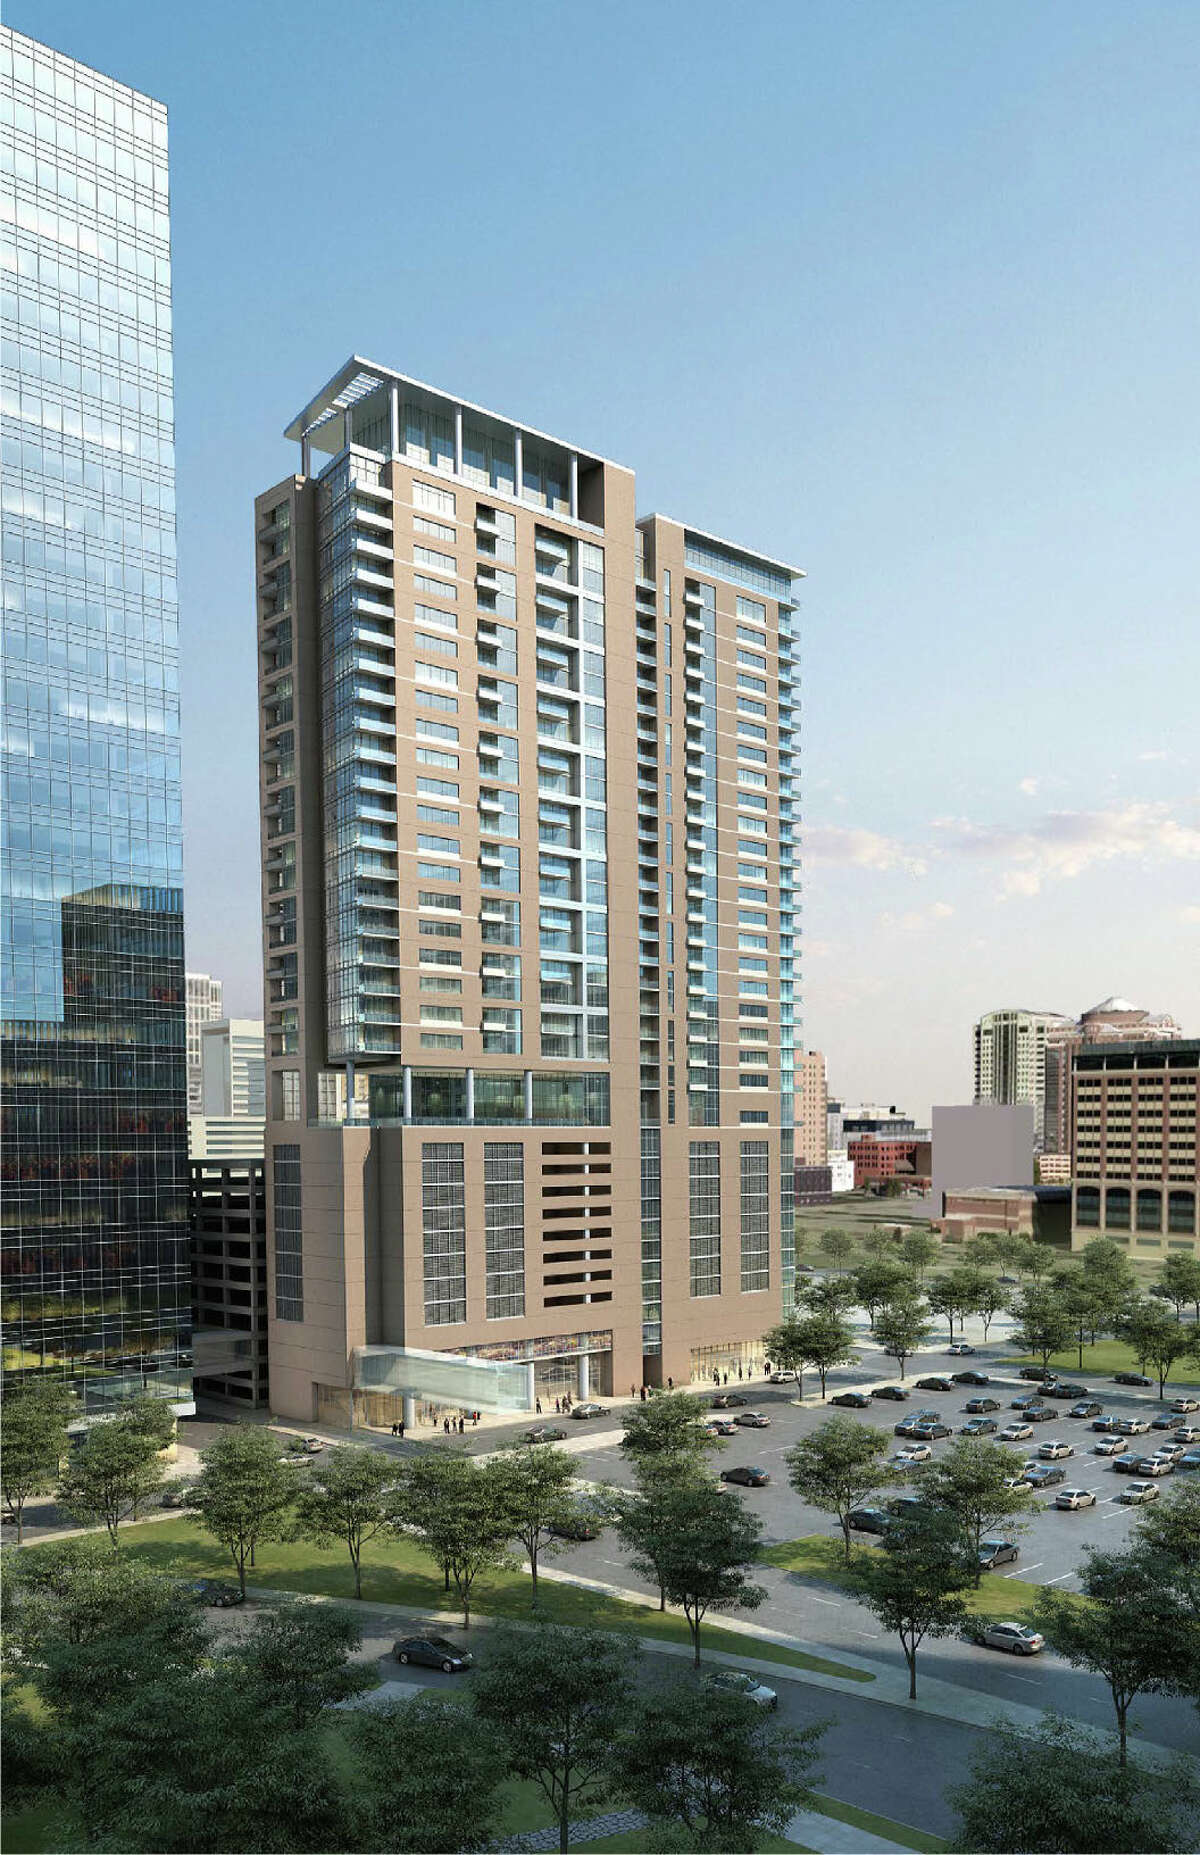 Ziegler Cooper designed this Trammell Crow residential tower slated for downtown Houston. (Courtesy of Houston Downtown Management District)